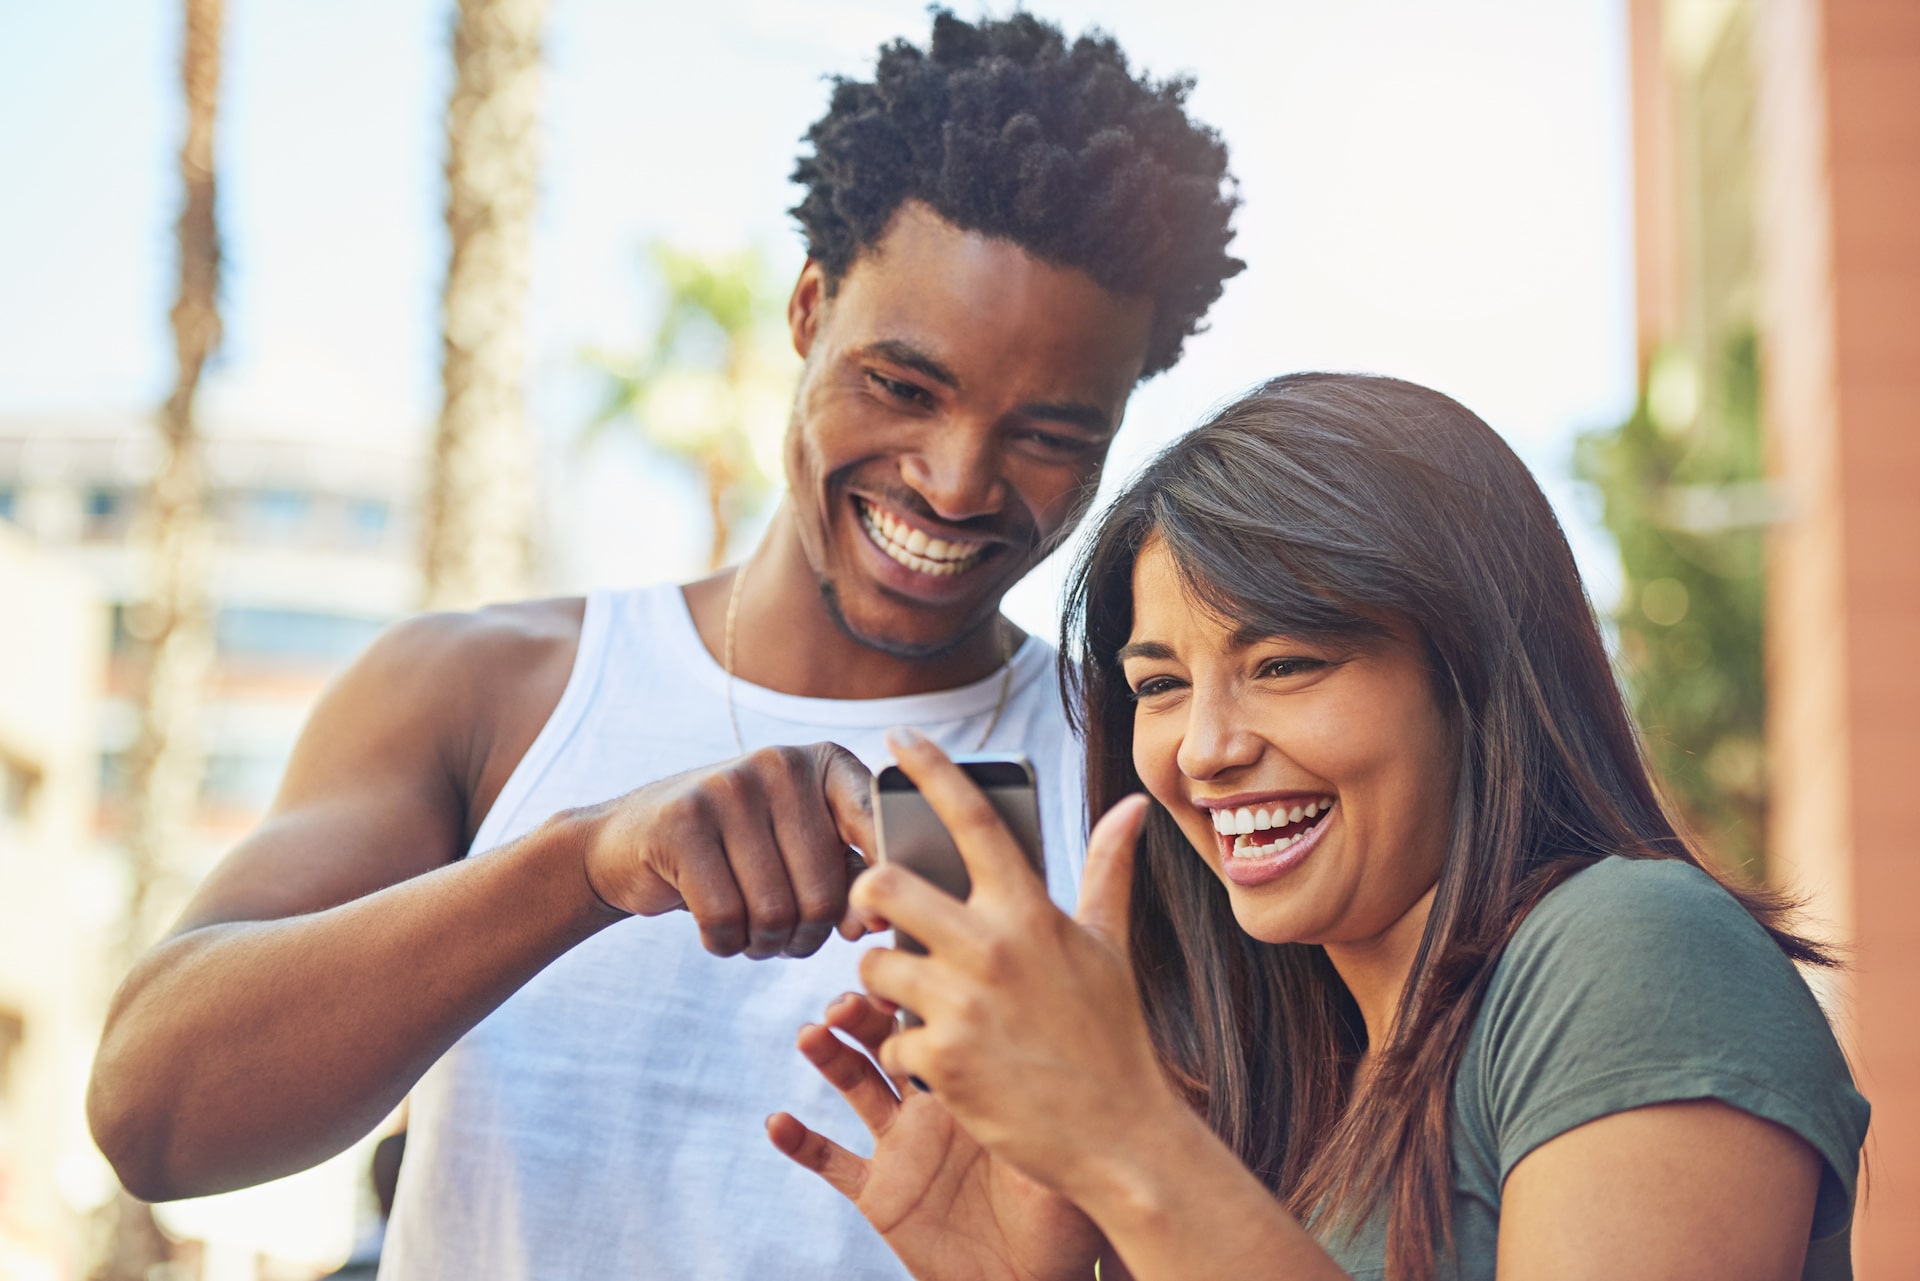 Two people, a man and women, looking at a phone and laughing. They are outside.